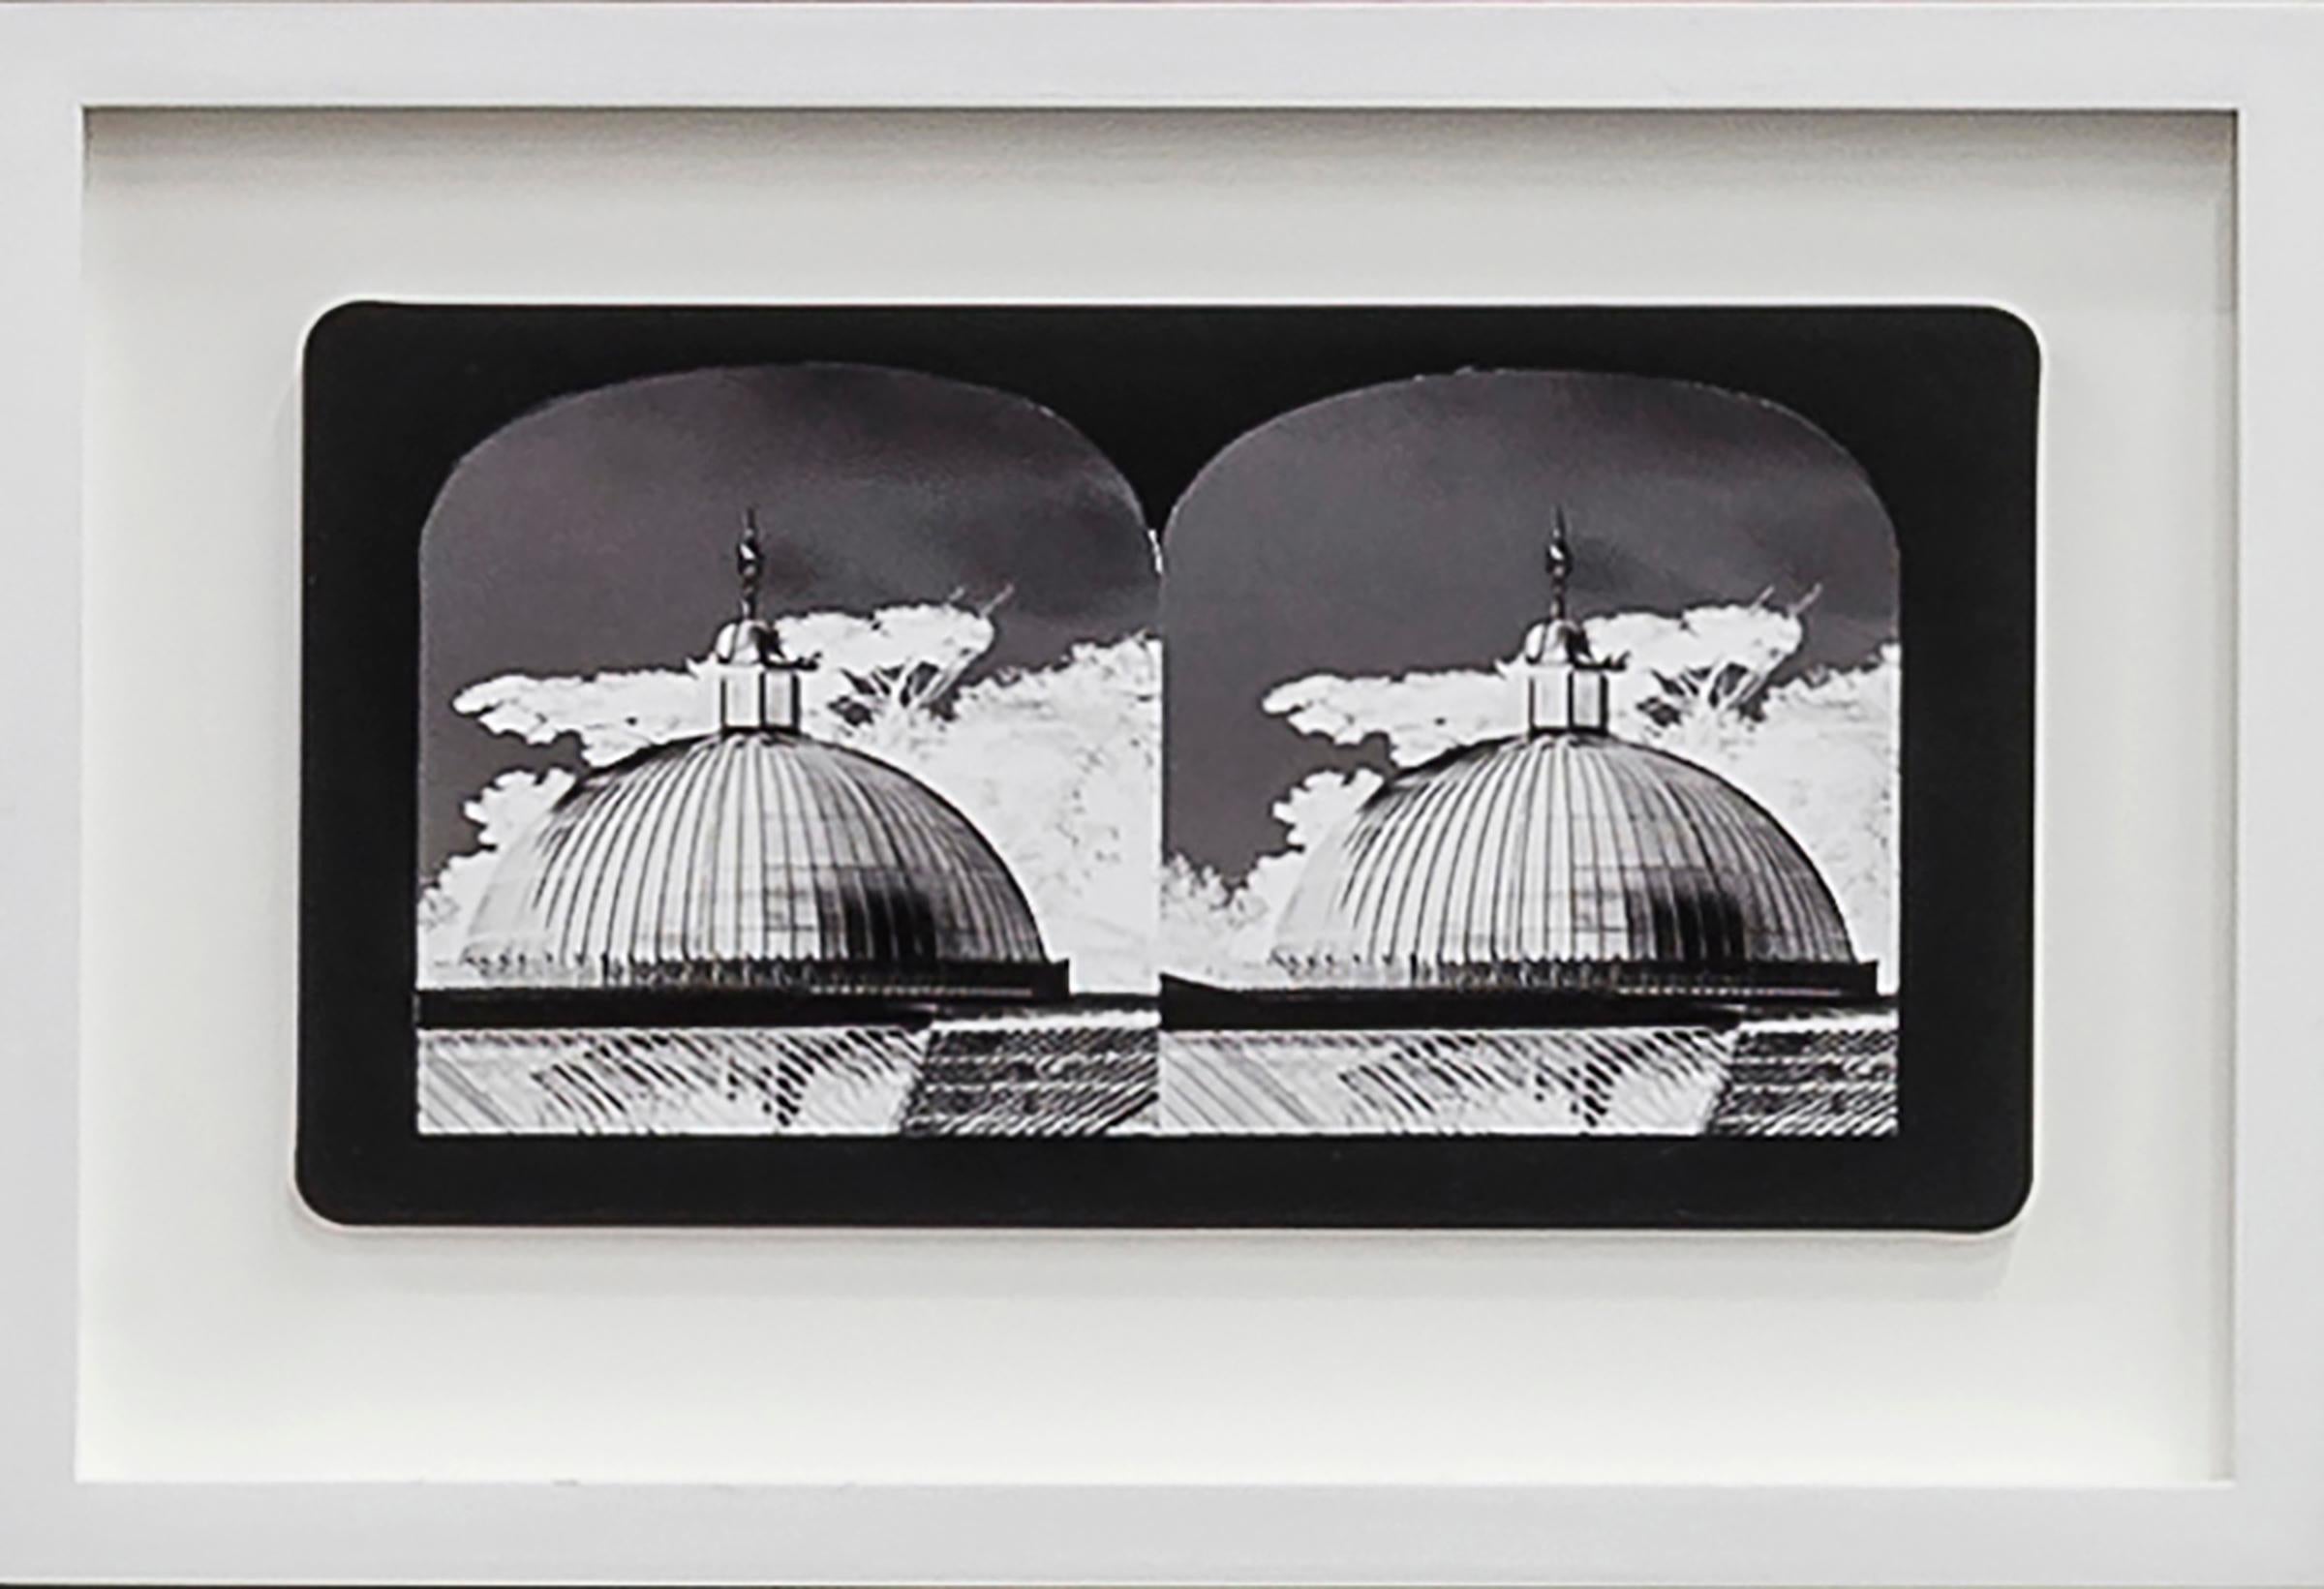 Penelope Stewart Landscape Photograph - Ruin Gazing No: 026 Domes at Kibble Palace, Glasgow, framed stereoscopic card